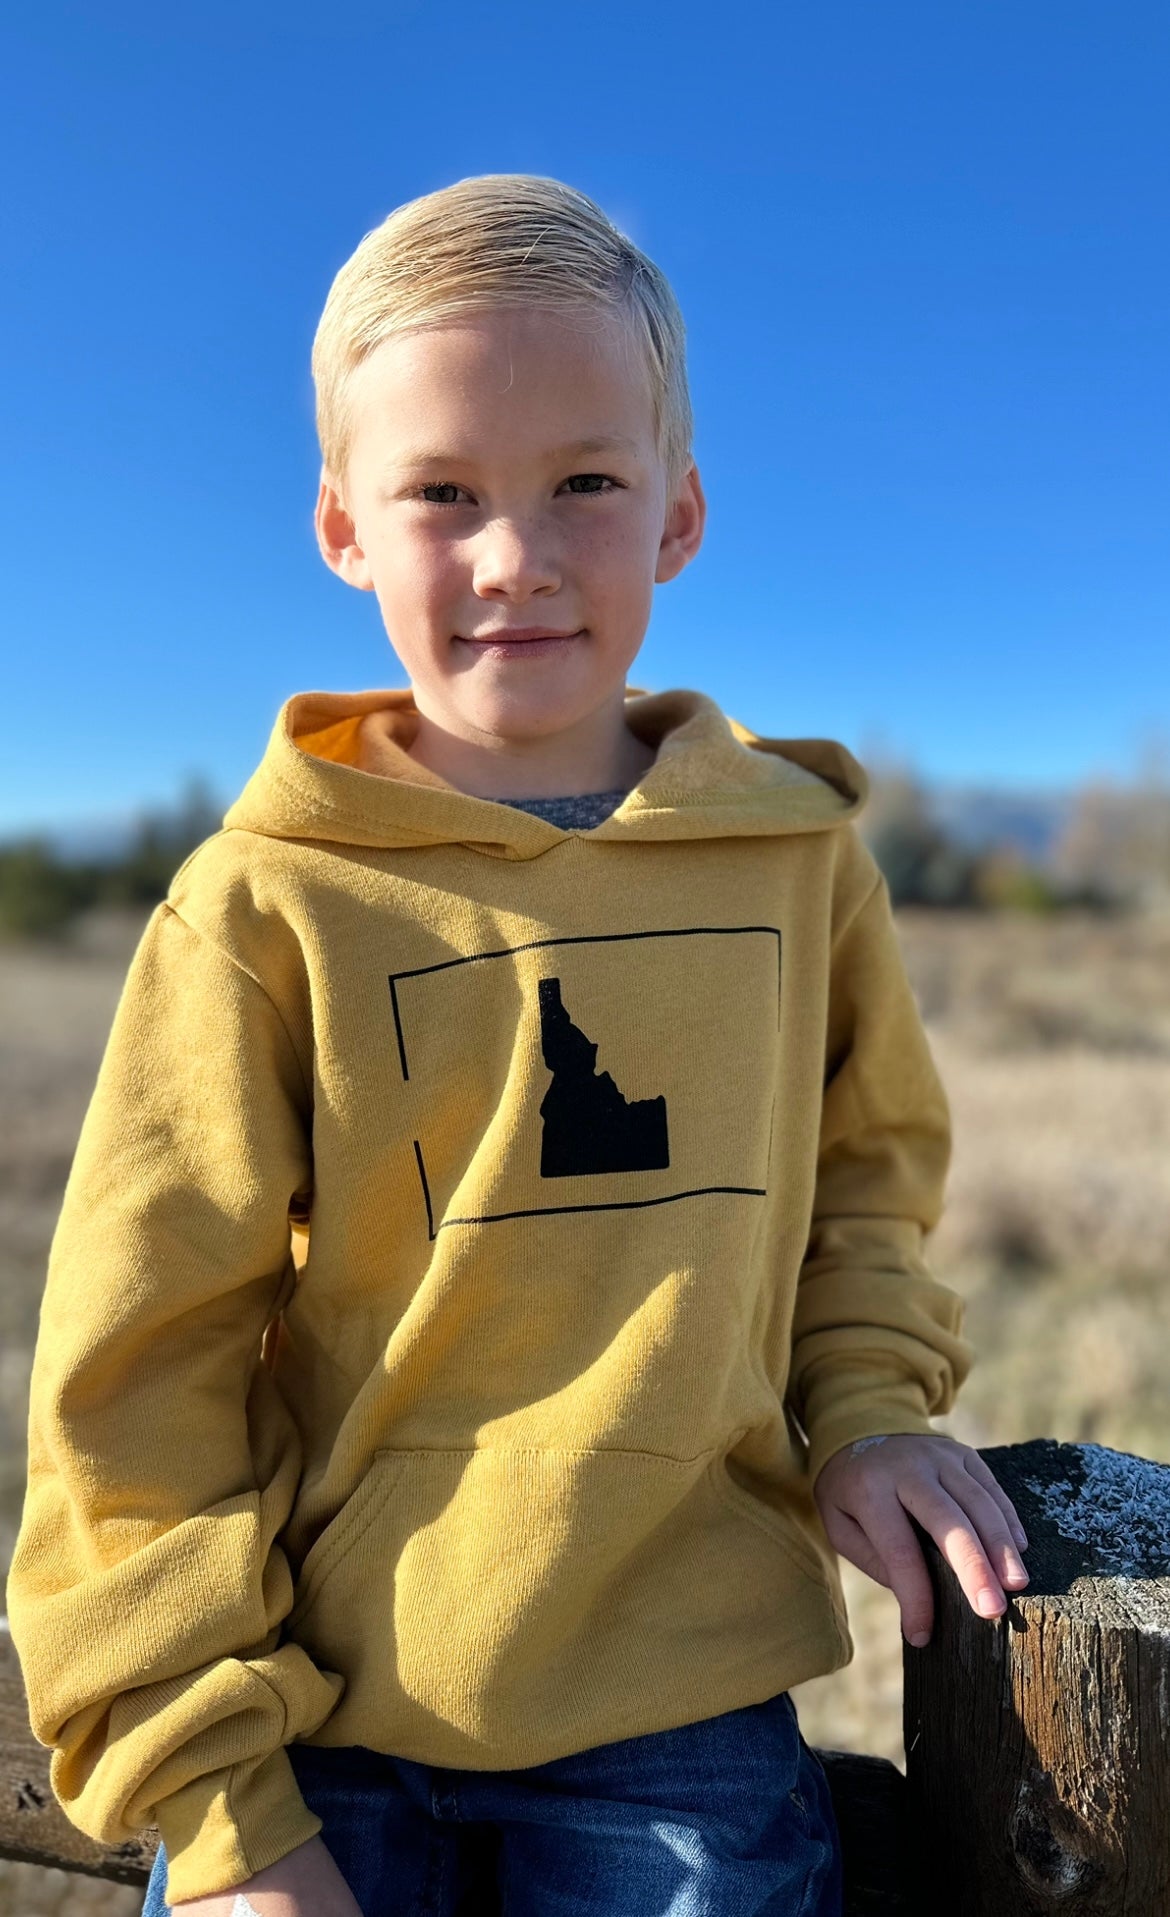 This Idaho hoodie is a must for Idaho kids. This Idaho clothing is a statement about our pride for living in Idaho. Idaho is the best place to live. Idaho clothing. Idaho apparel. Idaho apparel for kids. Idaho clothing for kids. TatorJo is made for idaho Kids. TatorJo. Idaho Living. 208 Living. Idaho Love. Made in Idaho. Idaho Hoodies. Idaho Sweatshirts. Idaho kids clothing. 